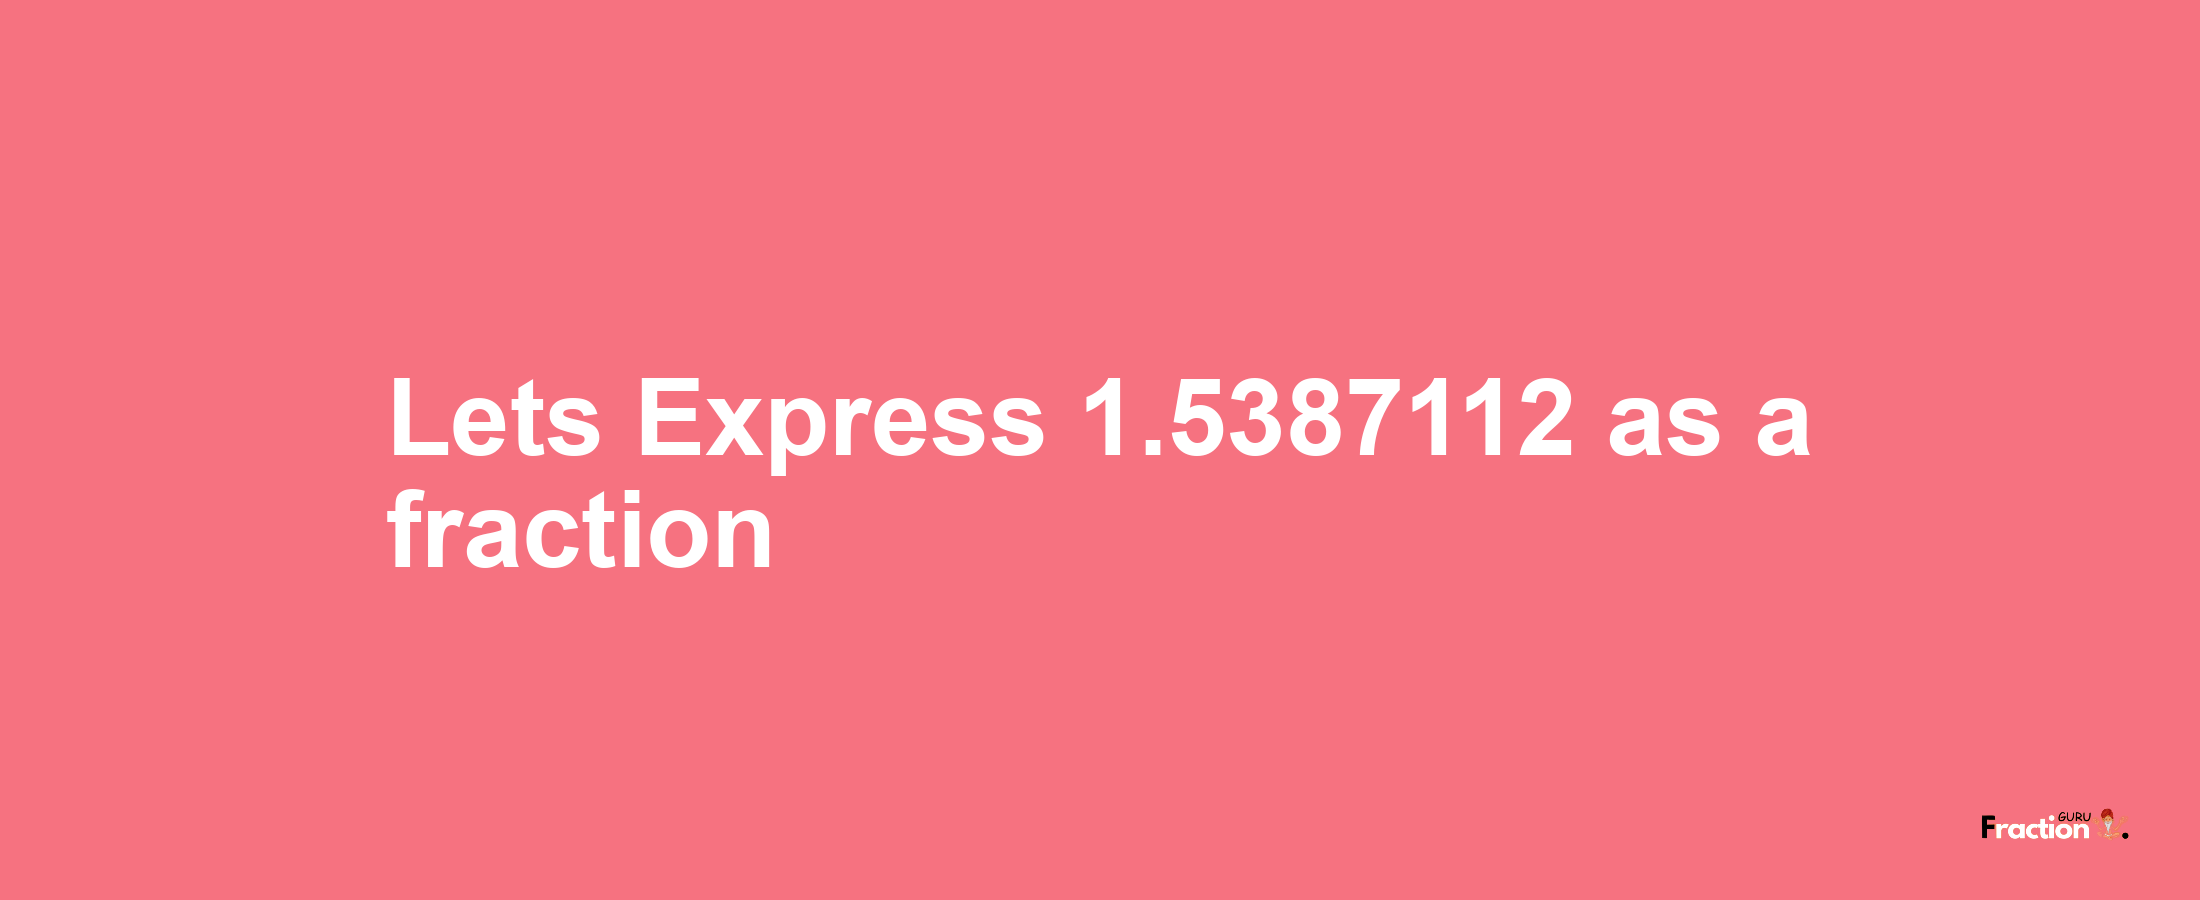 Lets Express 1.5387112 as afraction